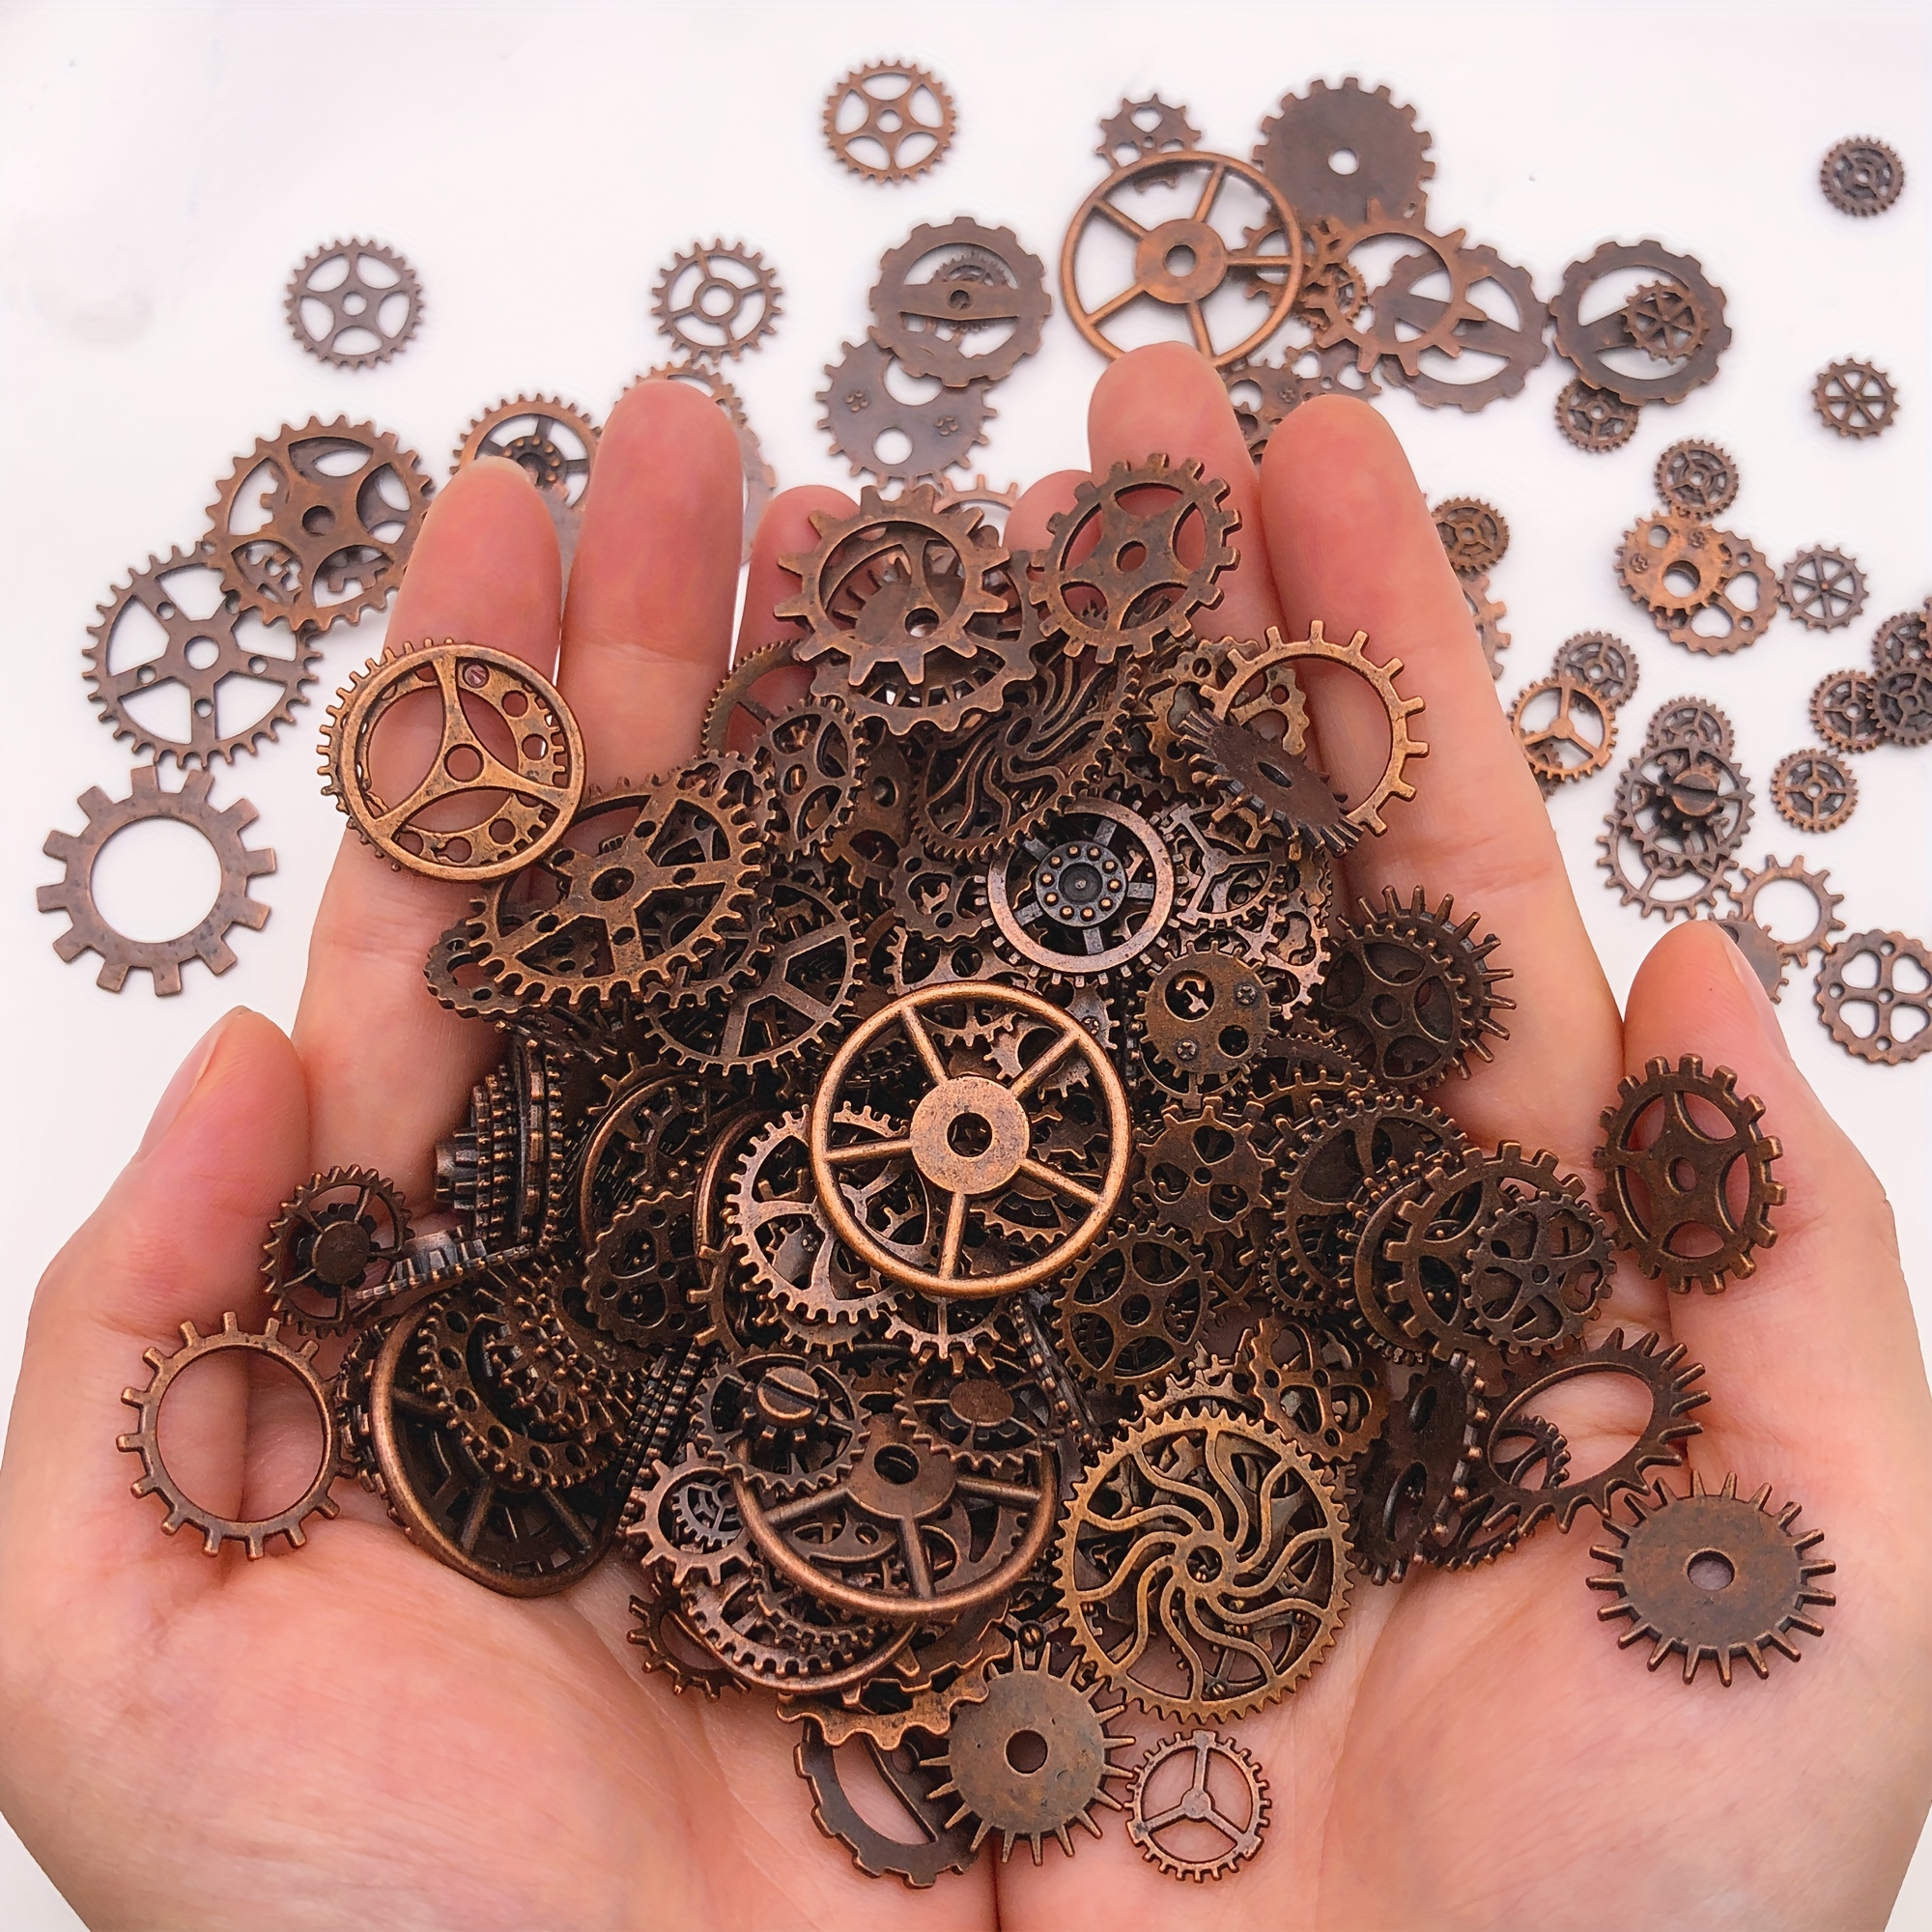 Random 1.06oz/1.76oz Red Copper Color Mixed Sizes Alloy Mechanical  Steampunk Cogs Gears Charms Pendant For DIY Jewelry Making Accessories